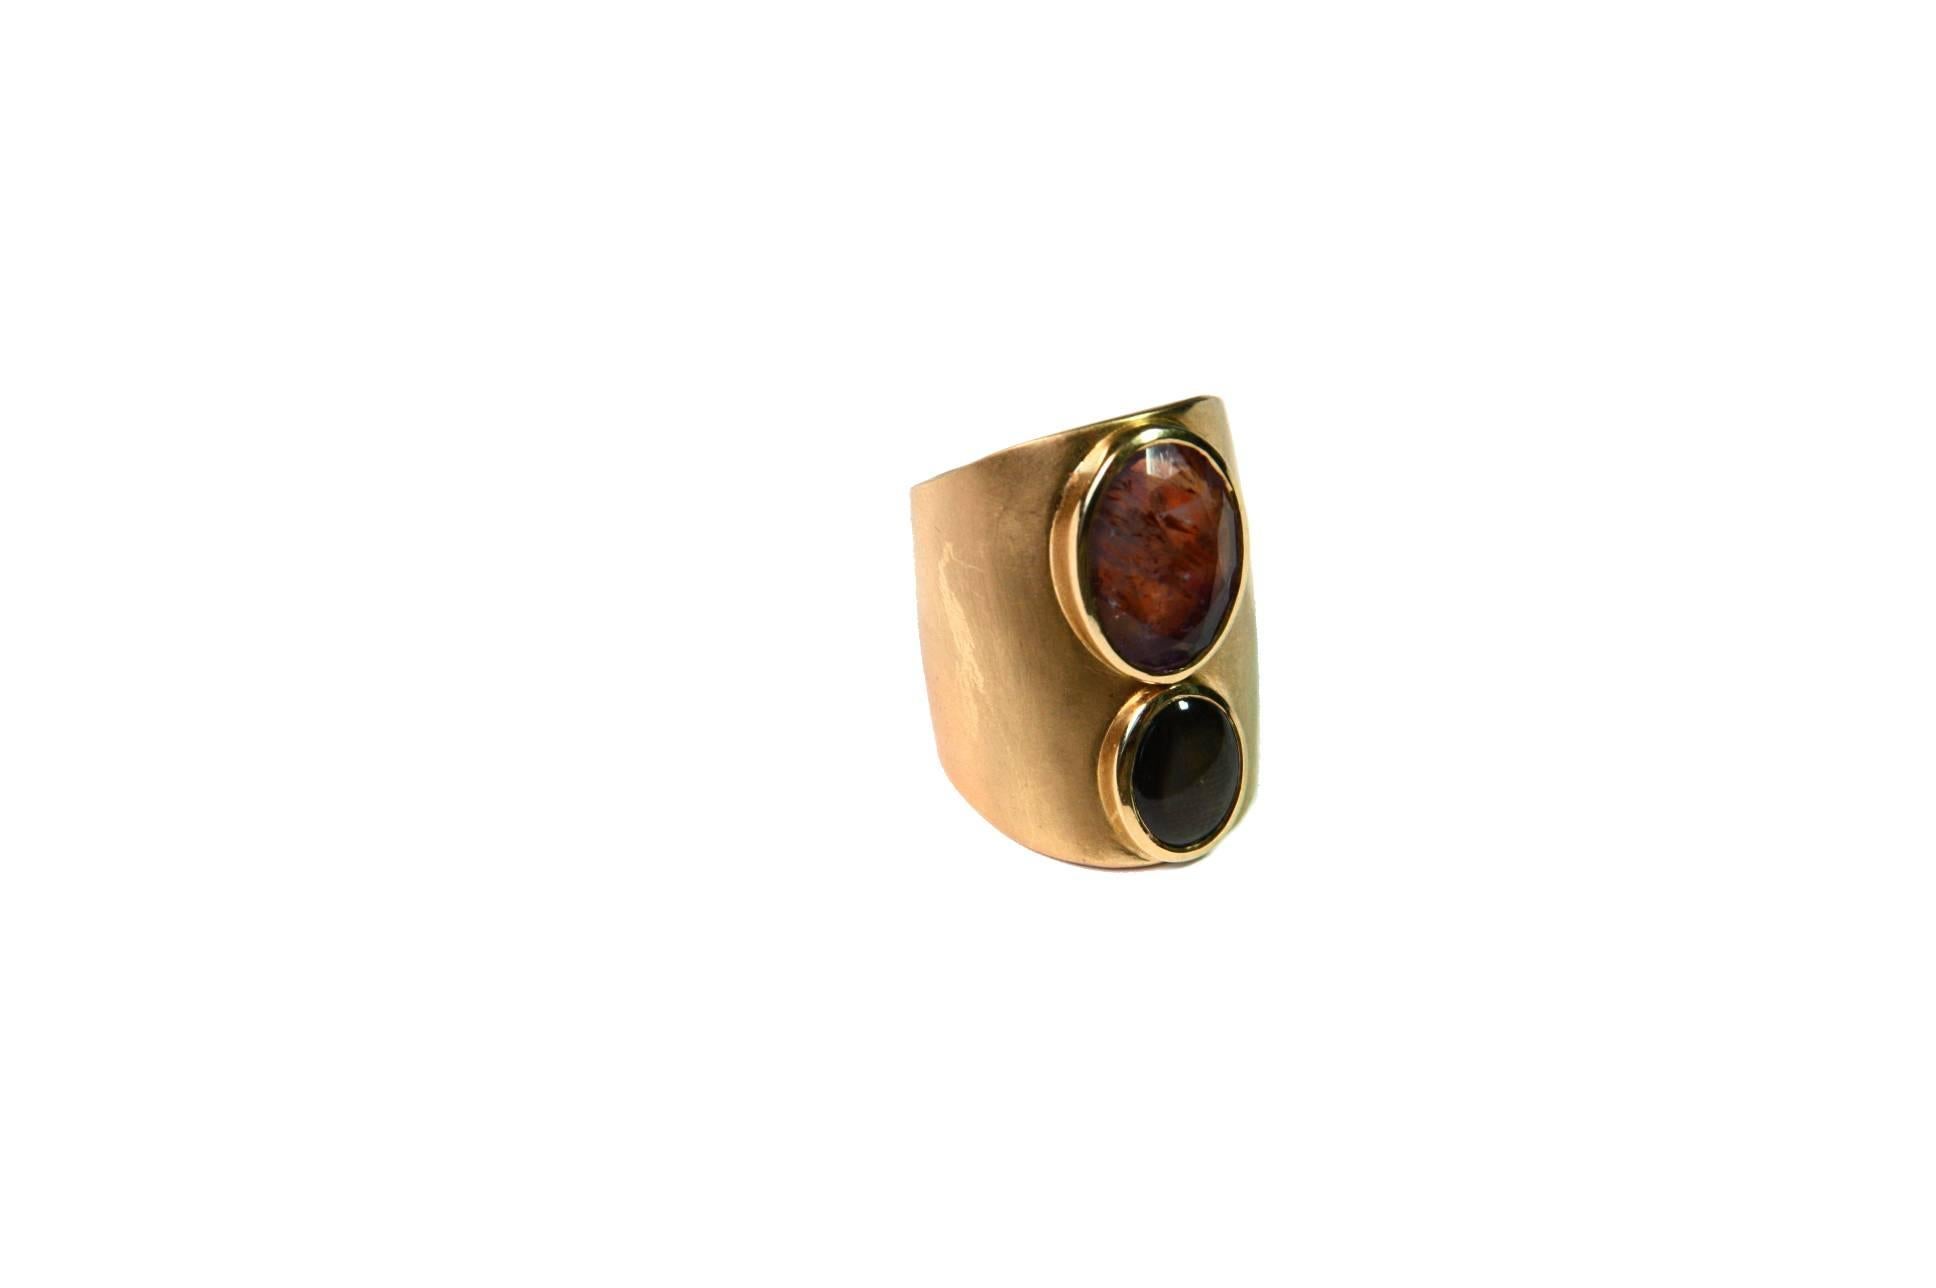 Very nice band ring 18k gold 19,70 gr with tourmaline cuscino cut  12 ct.
Size 14 eu.
All Giulia Colussi jewelry is new and has never been previously owned or worn. Each item will arrive at your door beautifully gift wrapped in our boxes, put inside